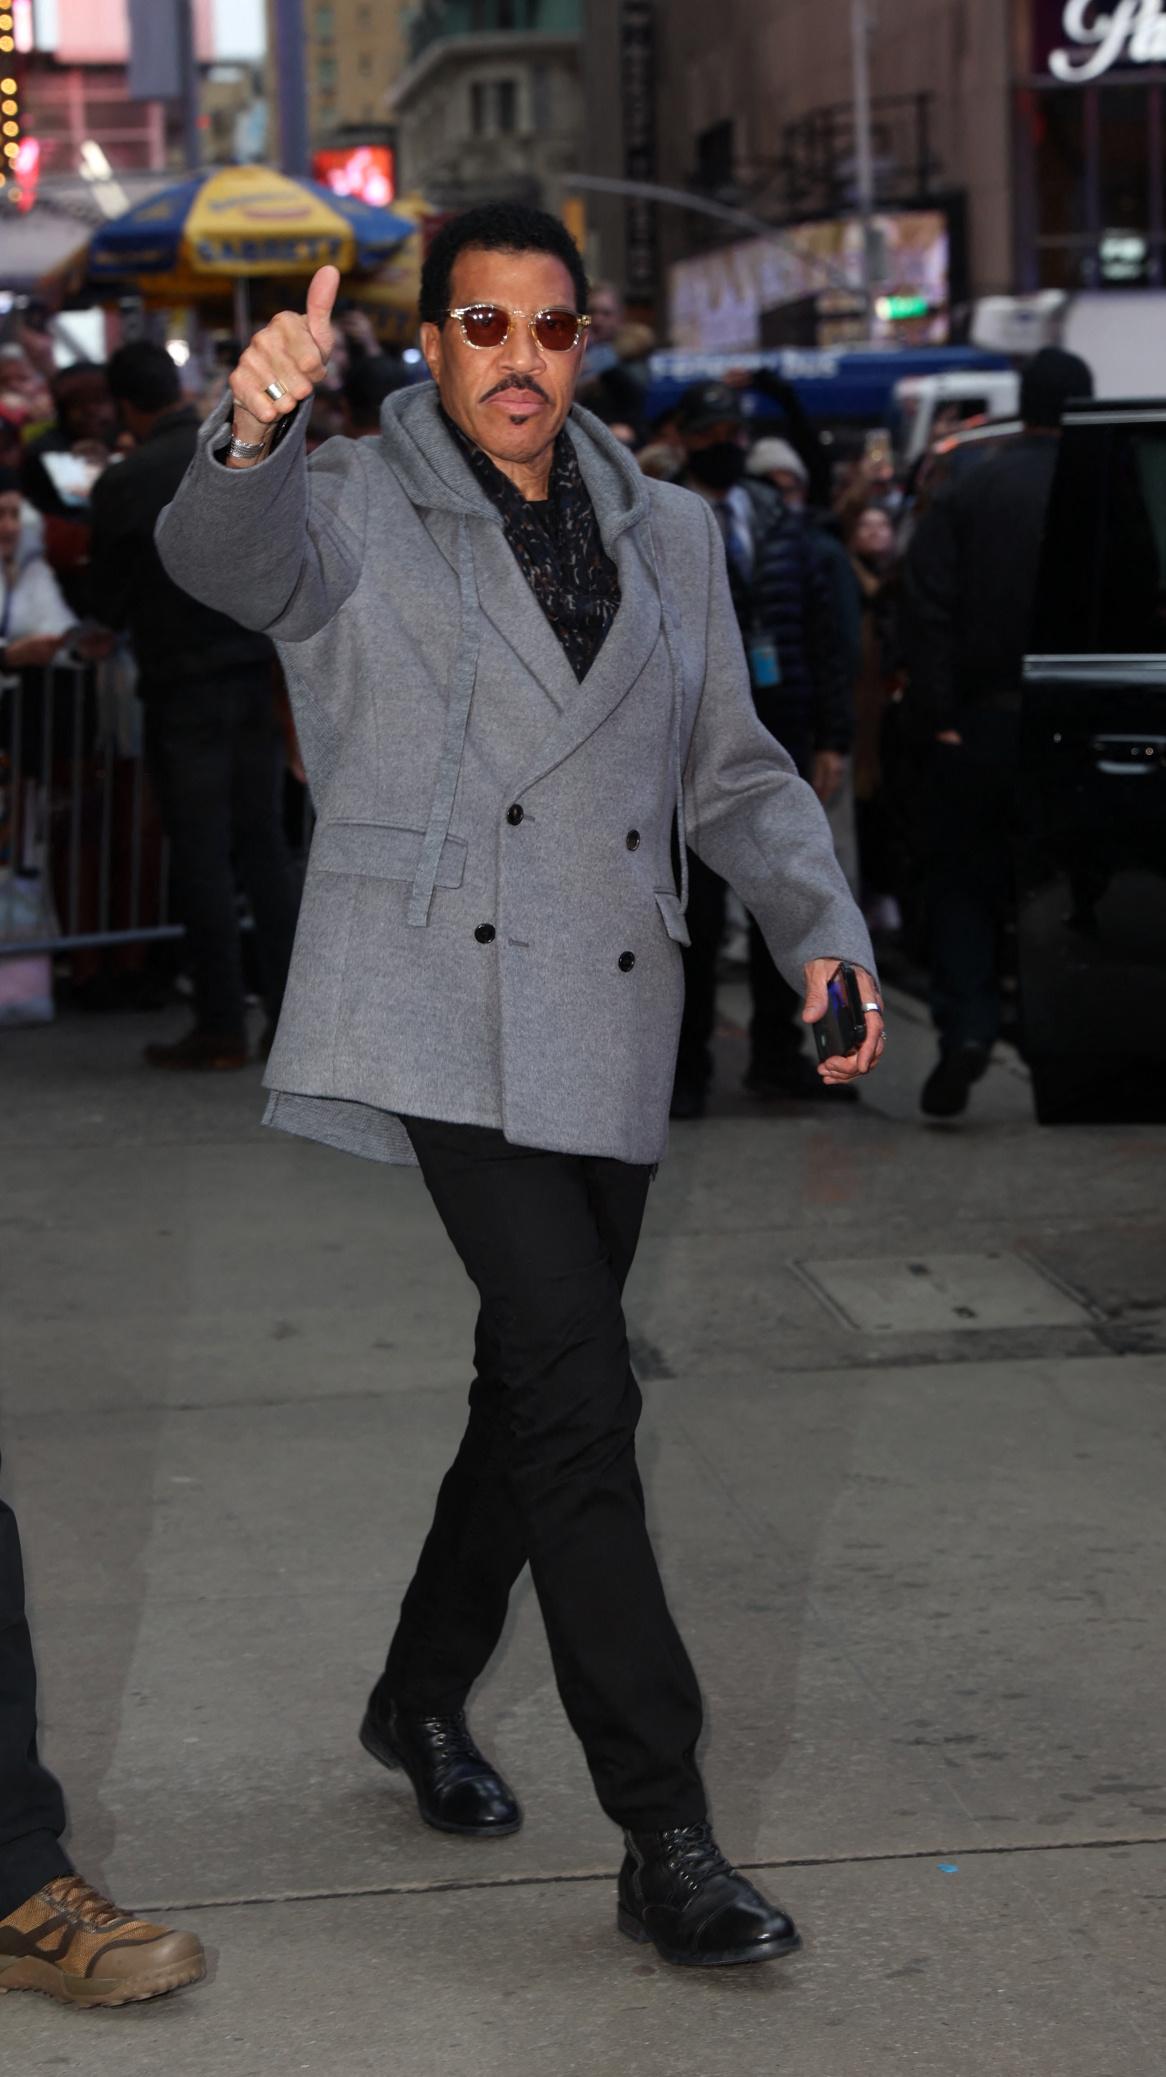 Lionel Richie seen at Good Morning America in New York City to promote American Idol